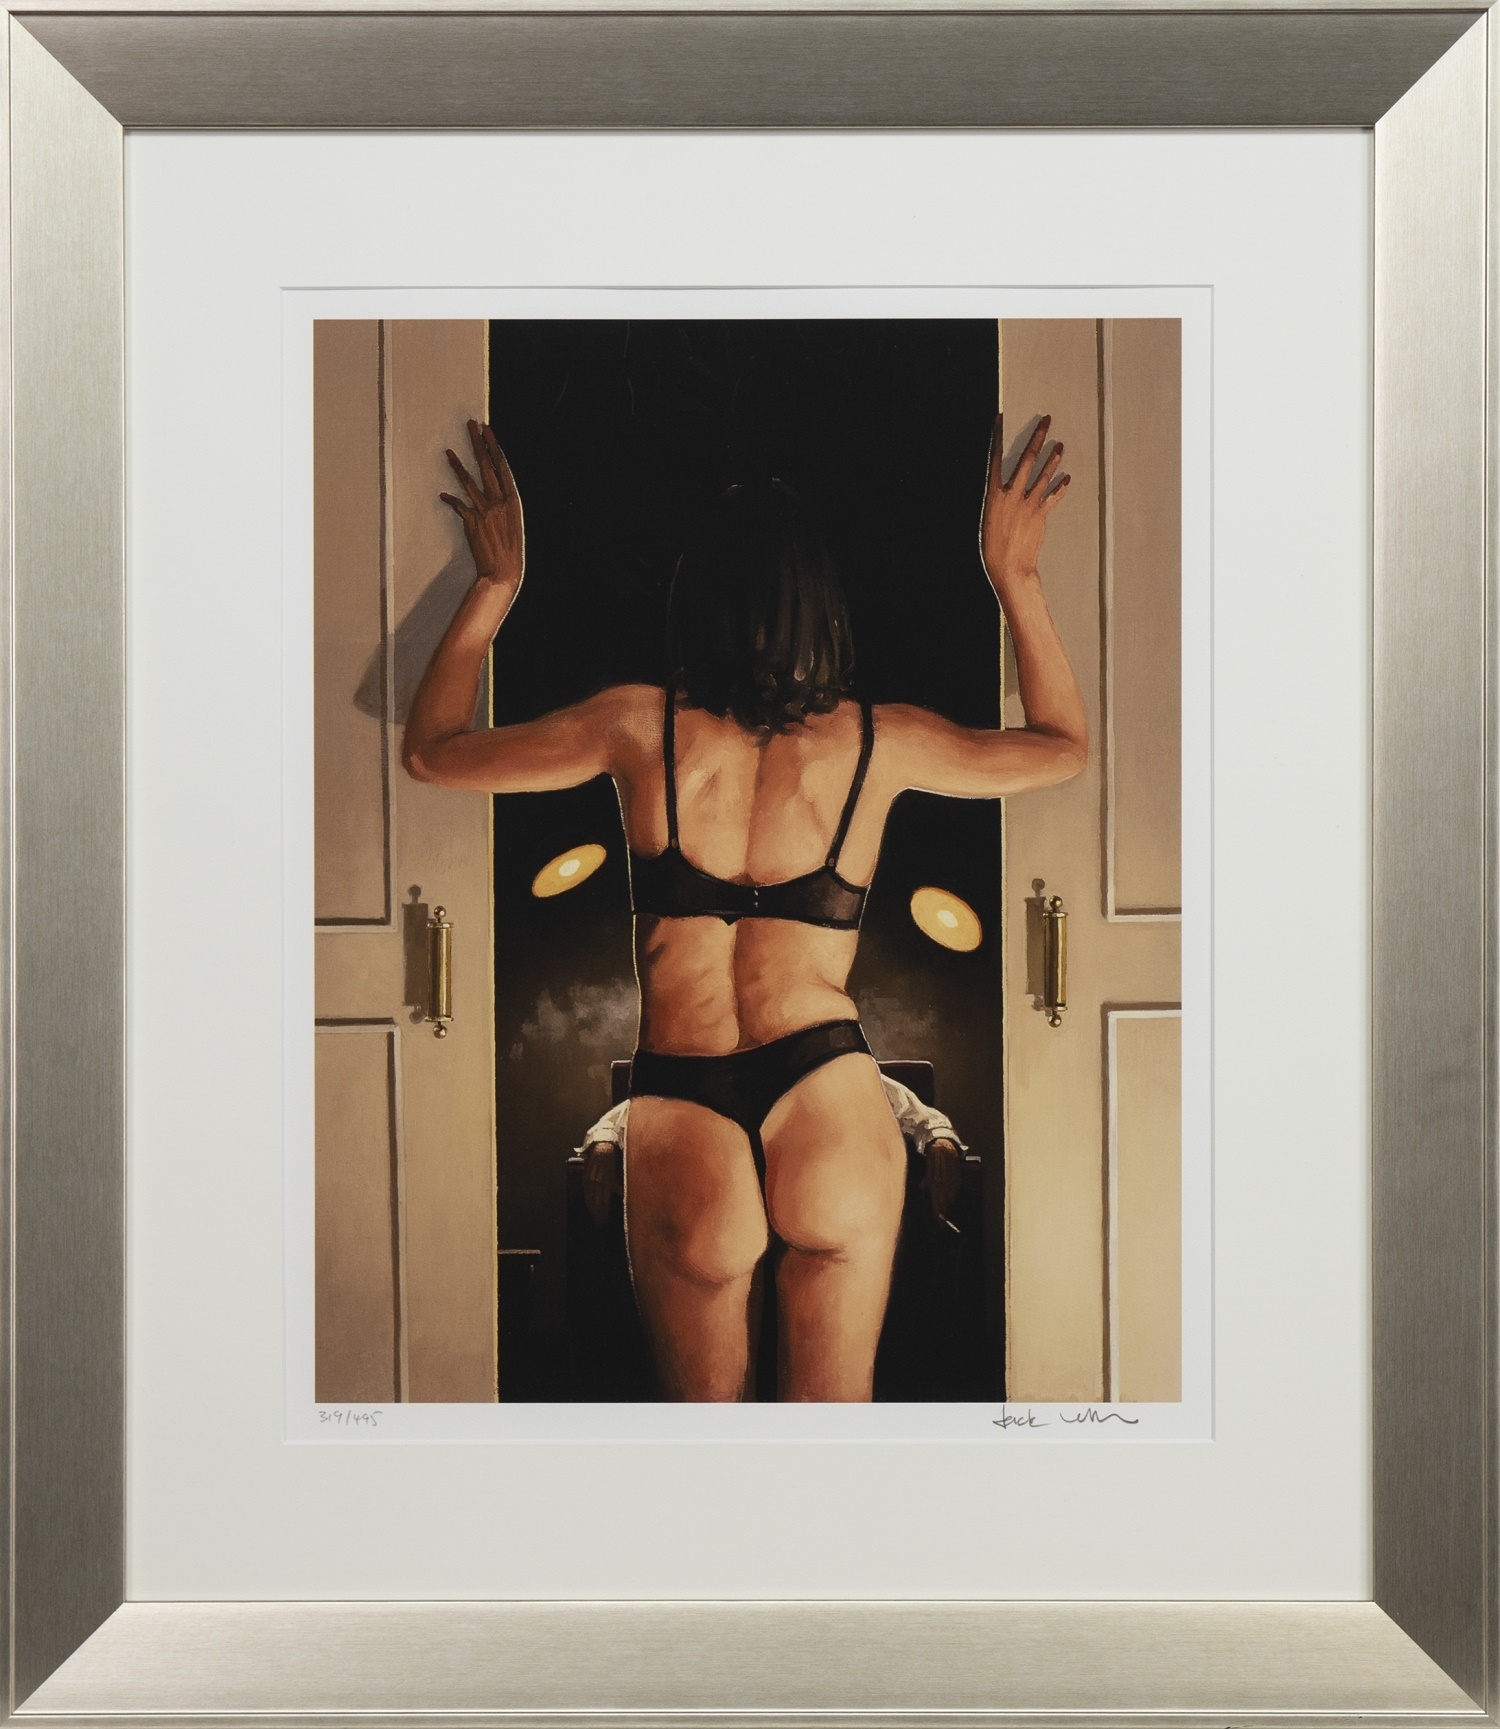 HIS FAVOURITE GIRL by Jack Vettriano